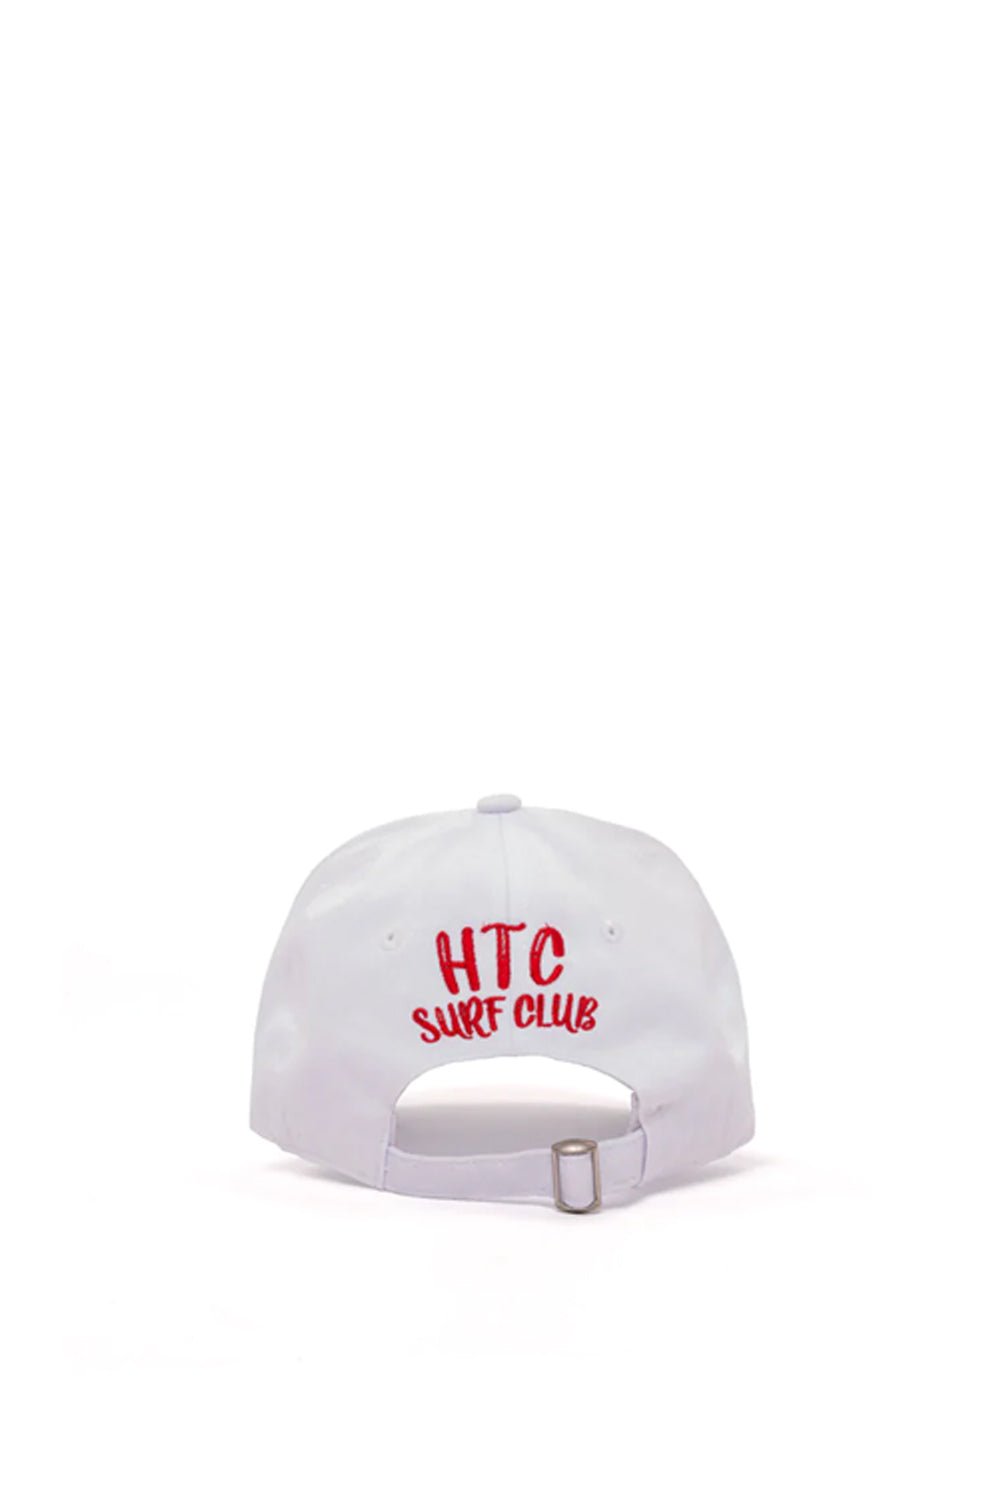 SURF CLUB CAP Limited Edition Black baseball cap with preformed peak, round crown with eyelets,'HTC SURF CLUB' logo printed on the front, adjustable strap on the back. One size fits all. 100% cotton. HTC LOS ANGELES